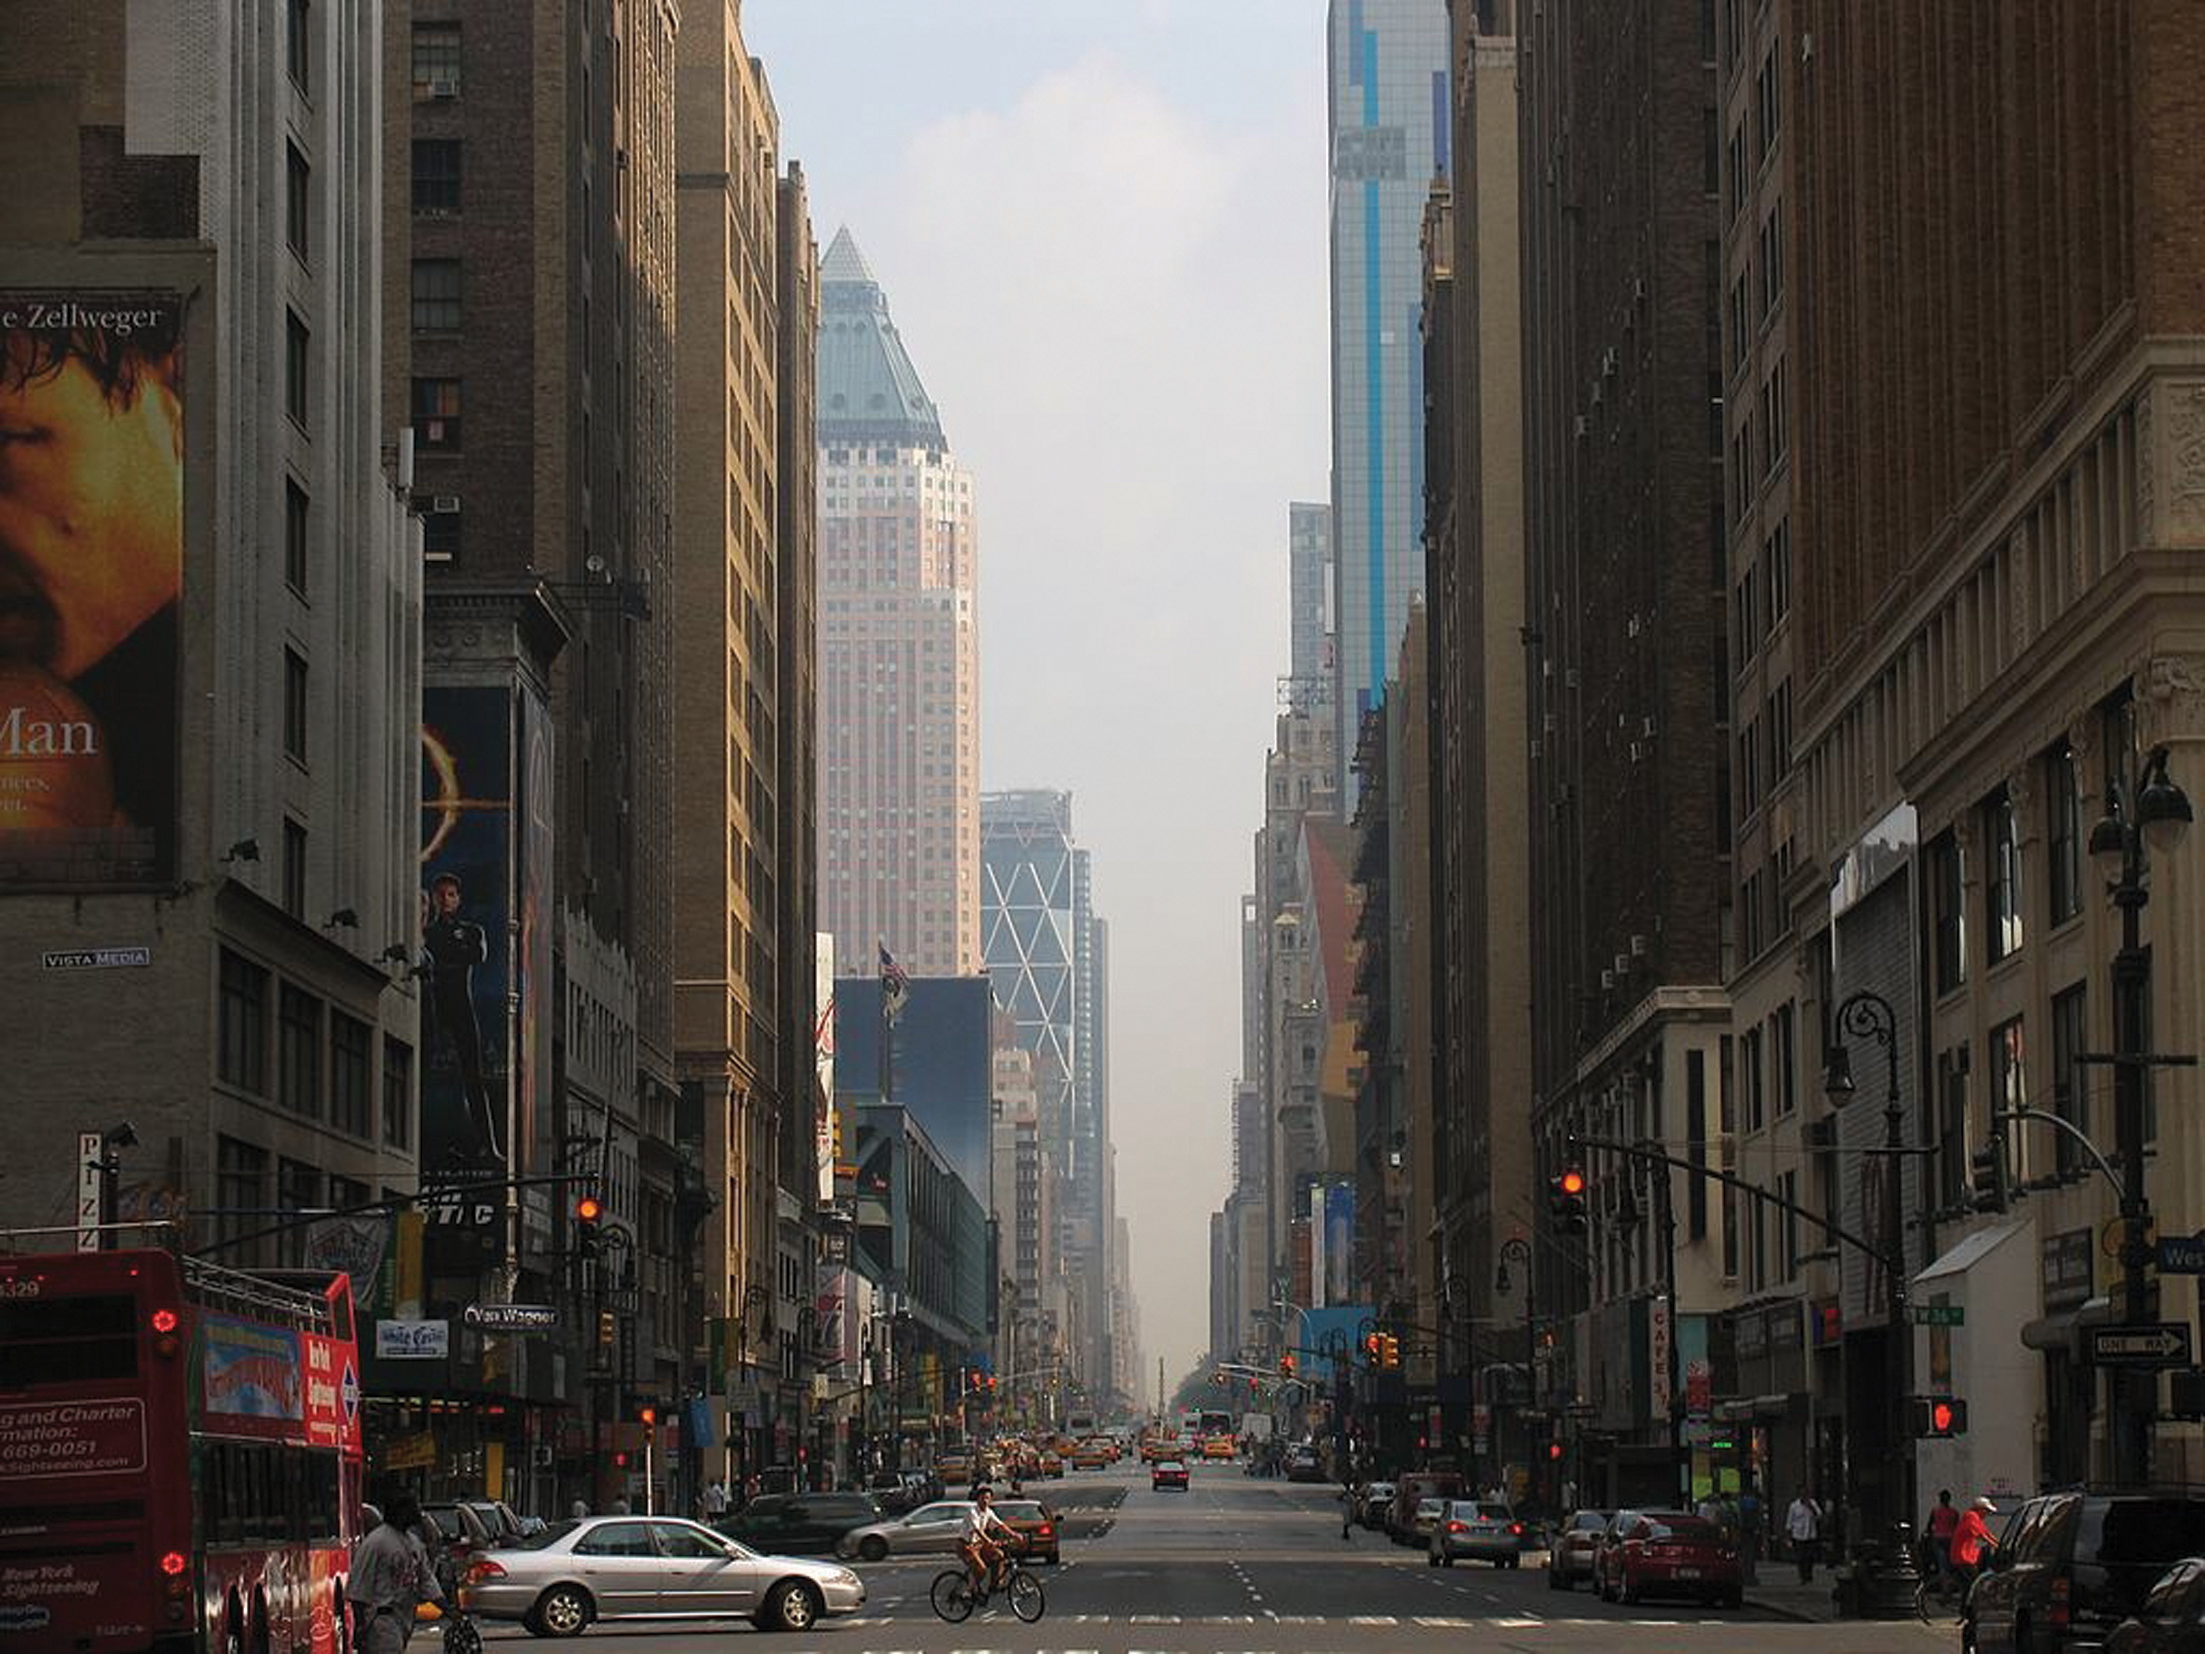 View down a New York street.